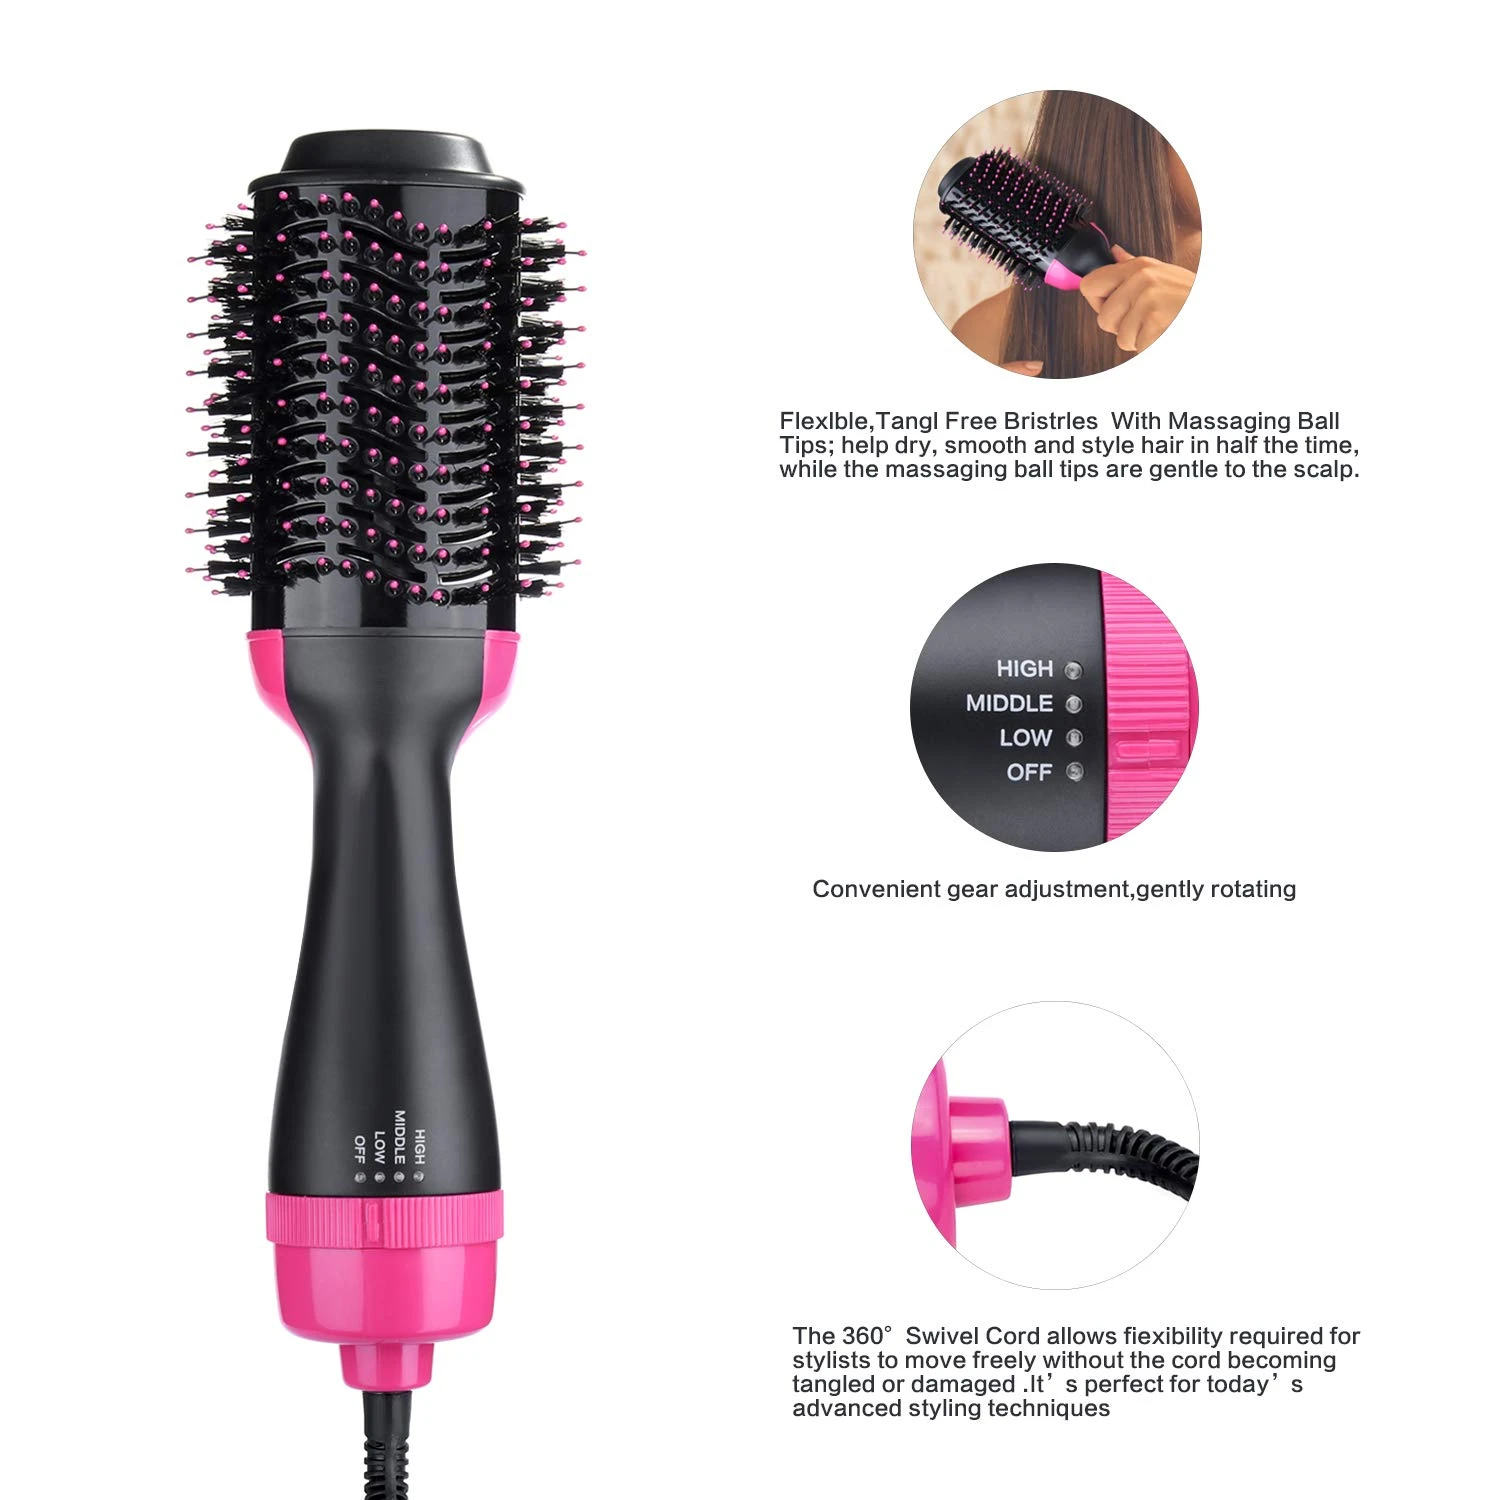 Popular hair dryer to quickly dry hair hot air blow brush 3 gear control hot hair dryer brush